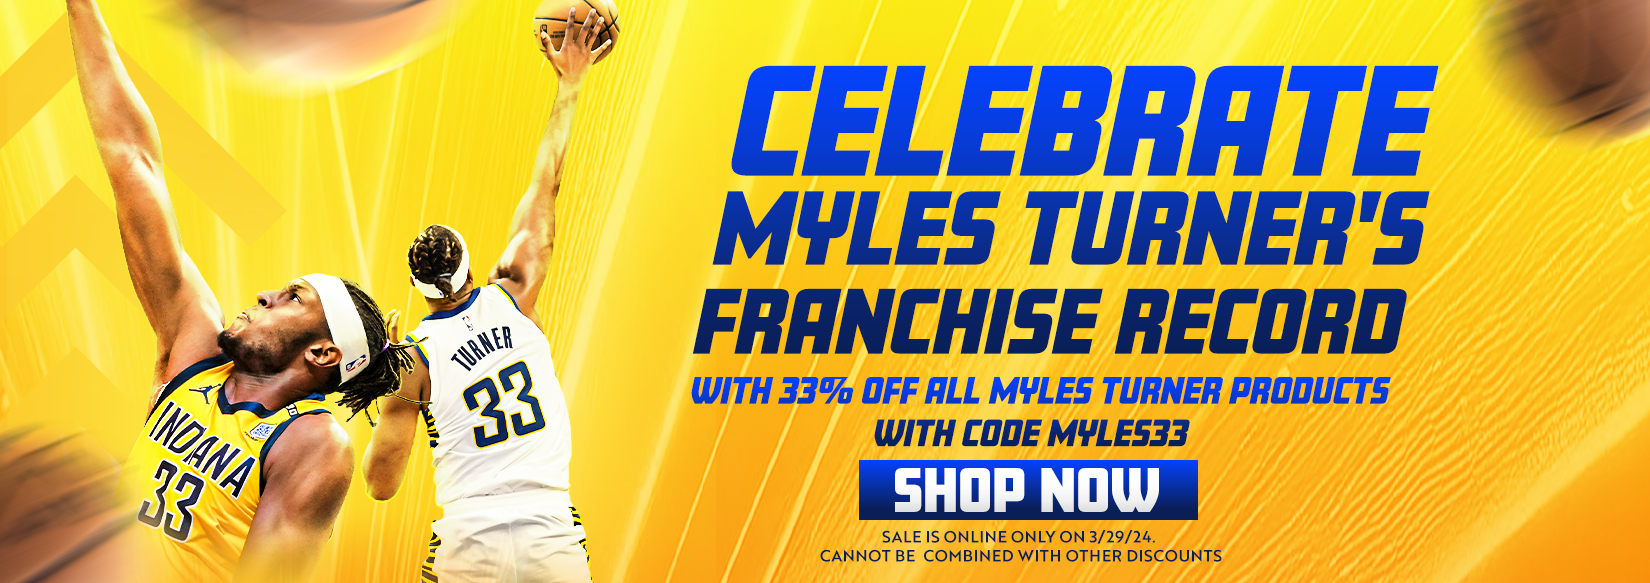 Celebrate Myles Turner's Franchise Record With 33% Off All Myles Turner Products WITH CODE MYLES33 SHOP NOW SALE IS ONLINE ONLY ON 3/29/24. CANNOT BE COMBINED WITH OTHER DISCOUNTS.